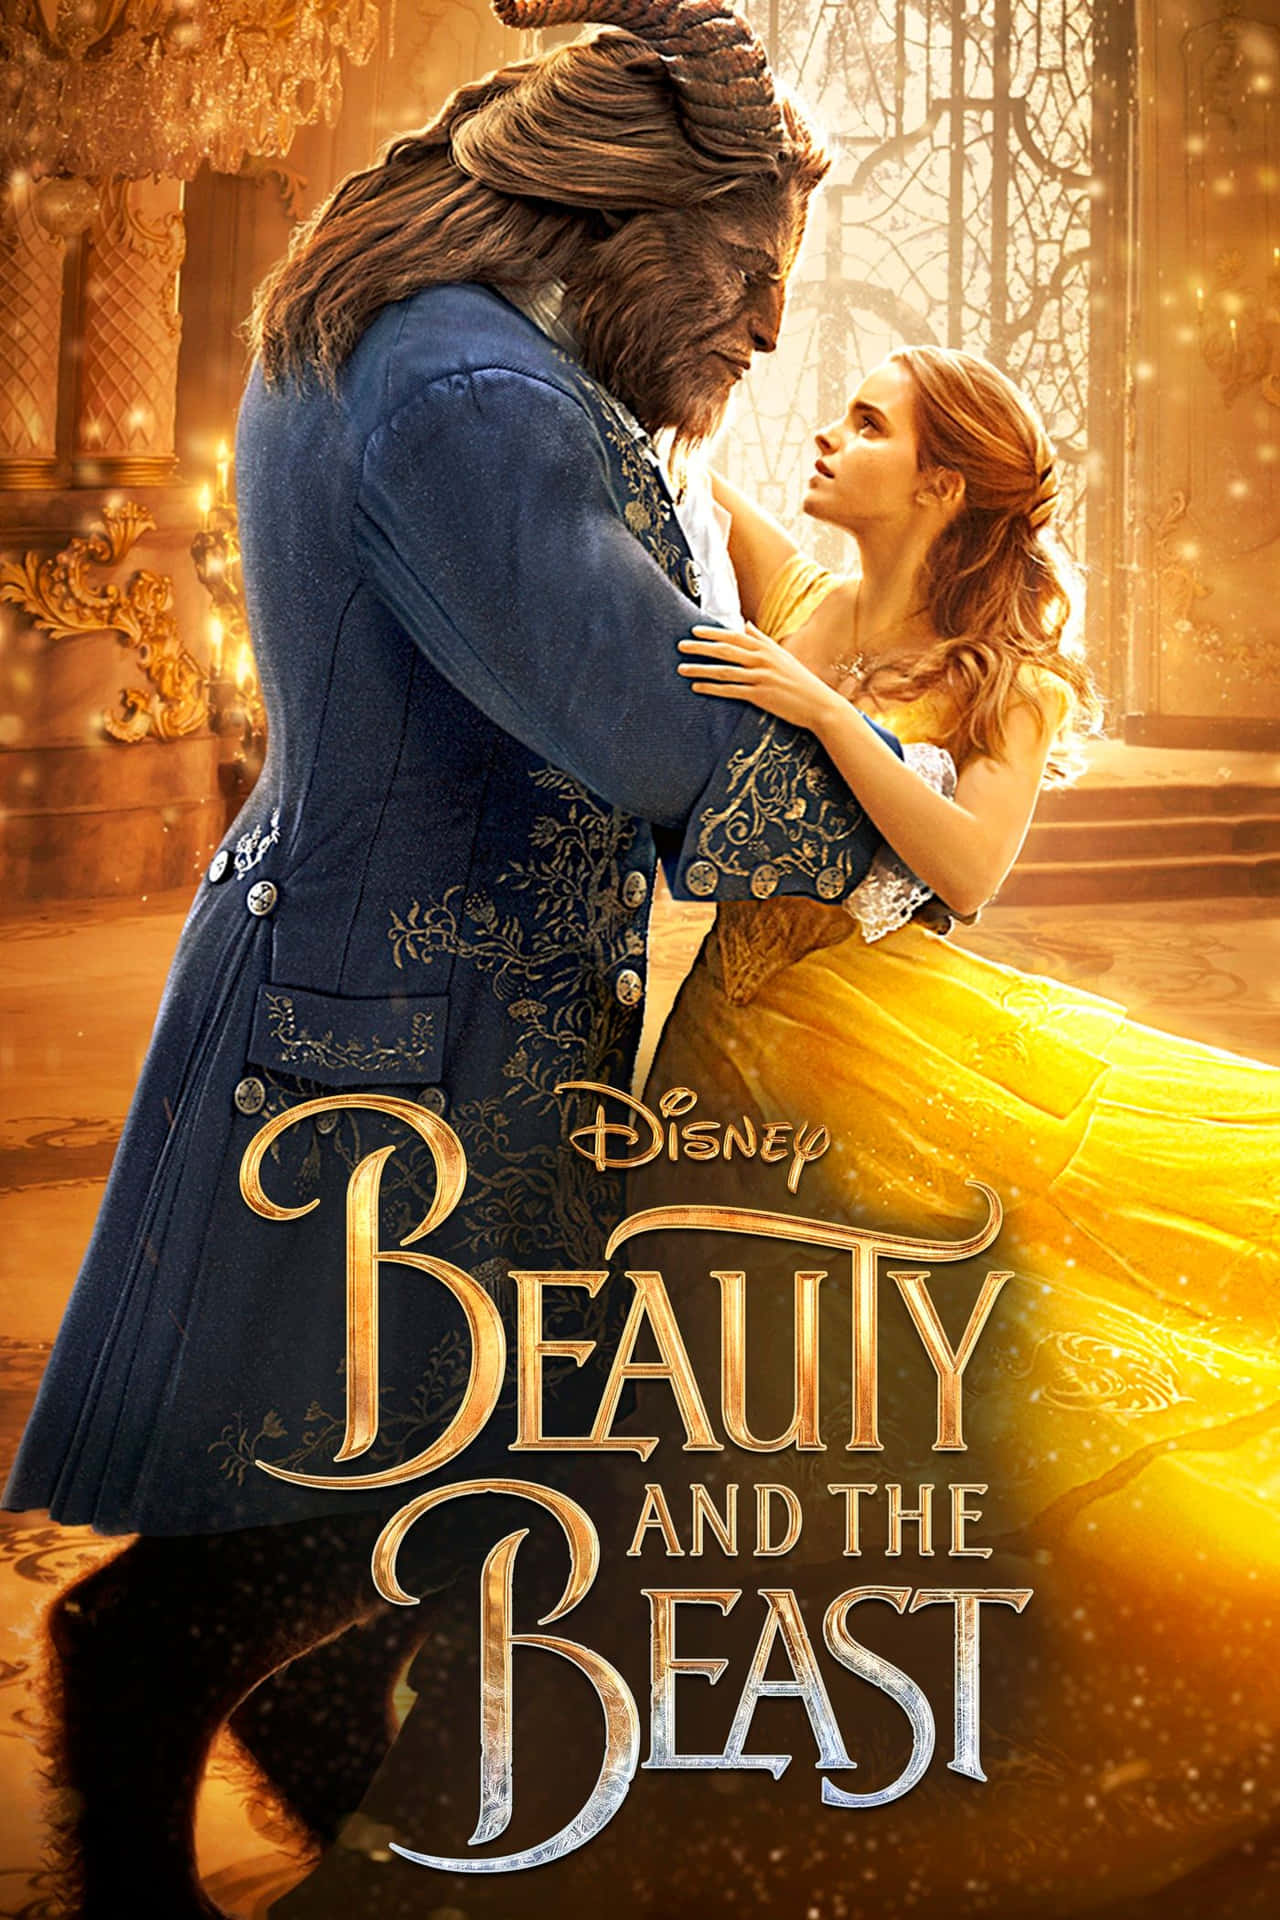 A Tale as Old as Time - Beauty and the Beast